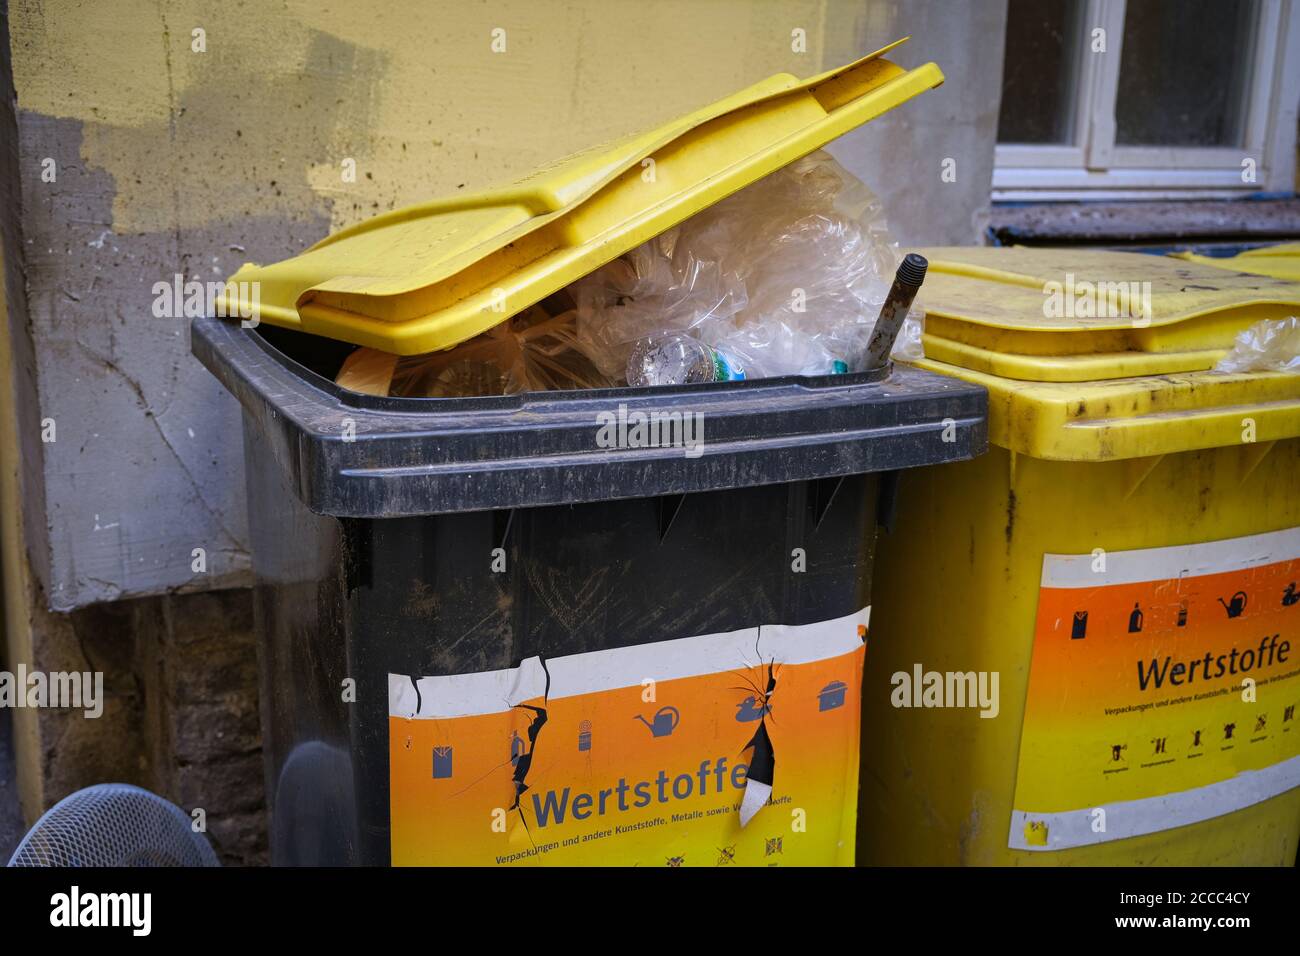 Rubbish bins for plastic and e-waste recycling in Berlin Stock Photo - Alamy